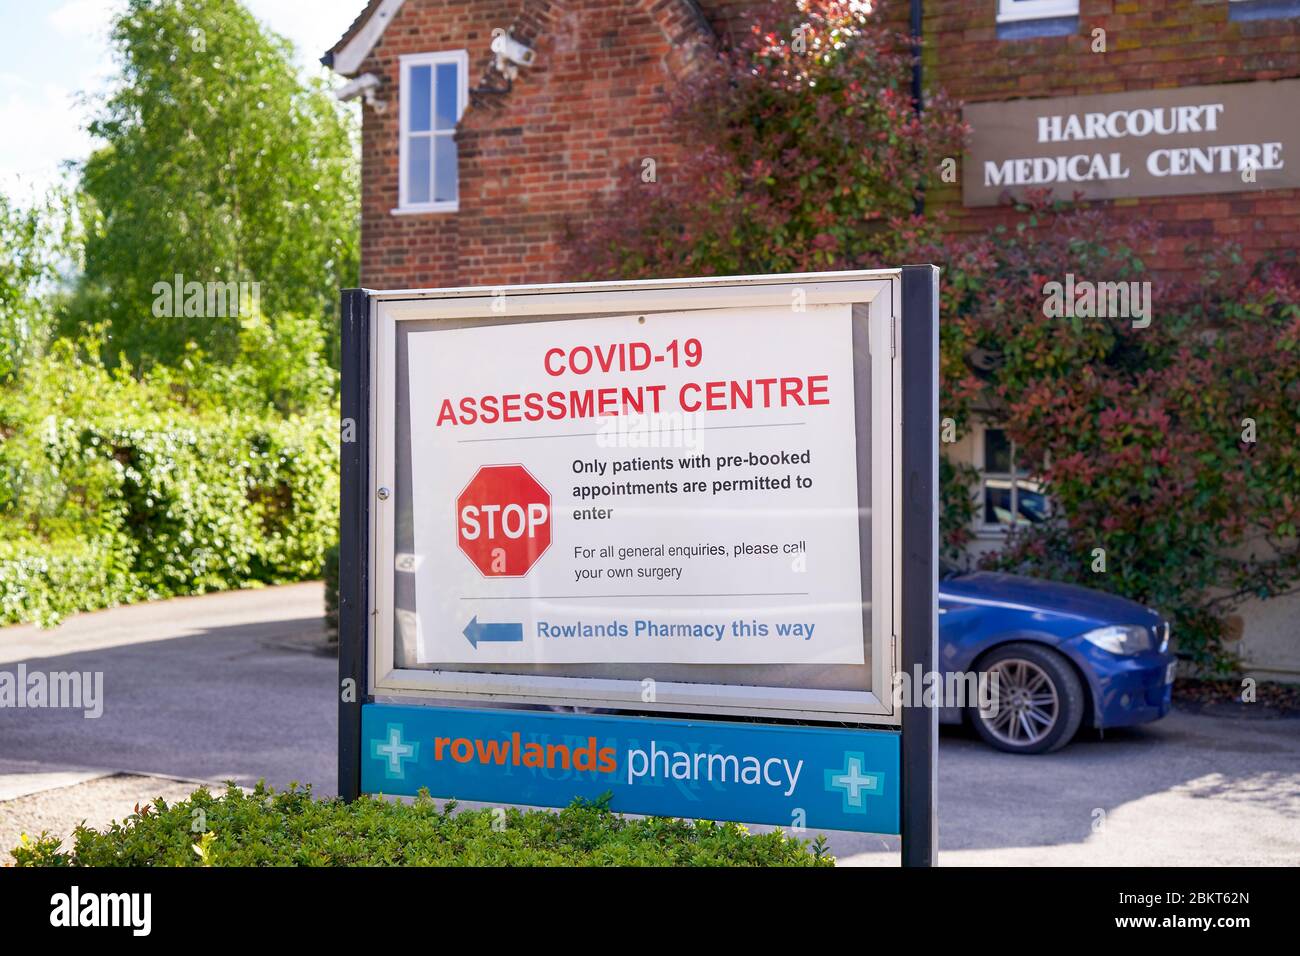 Covid-19 assessment centre sign Stock Photo